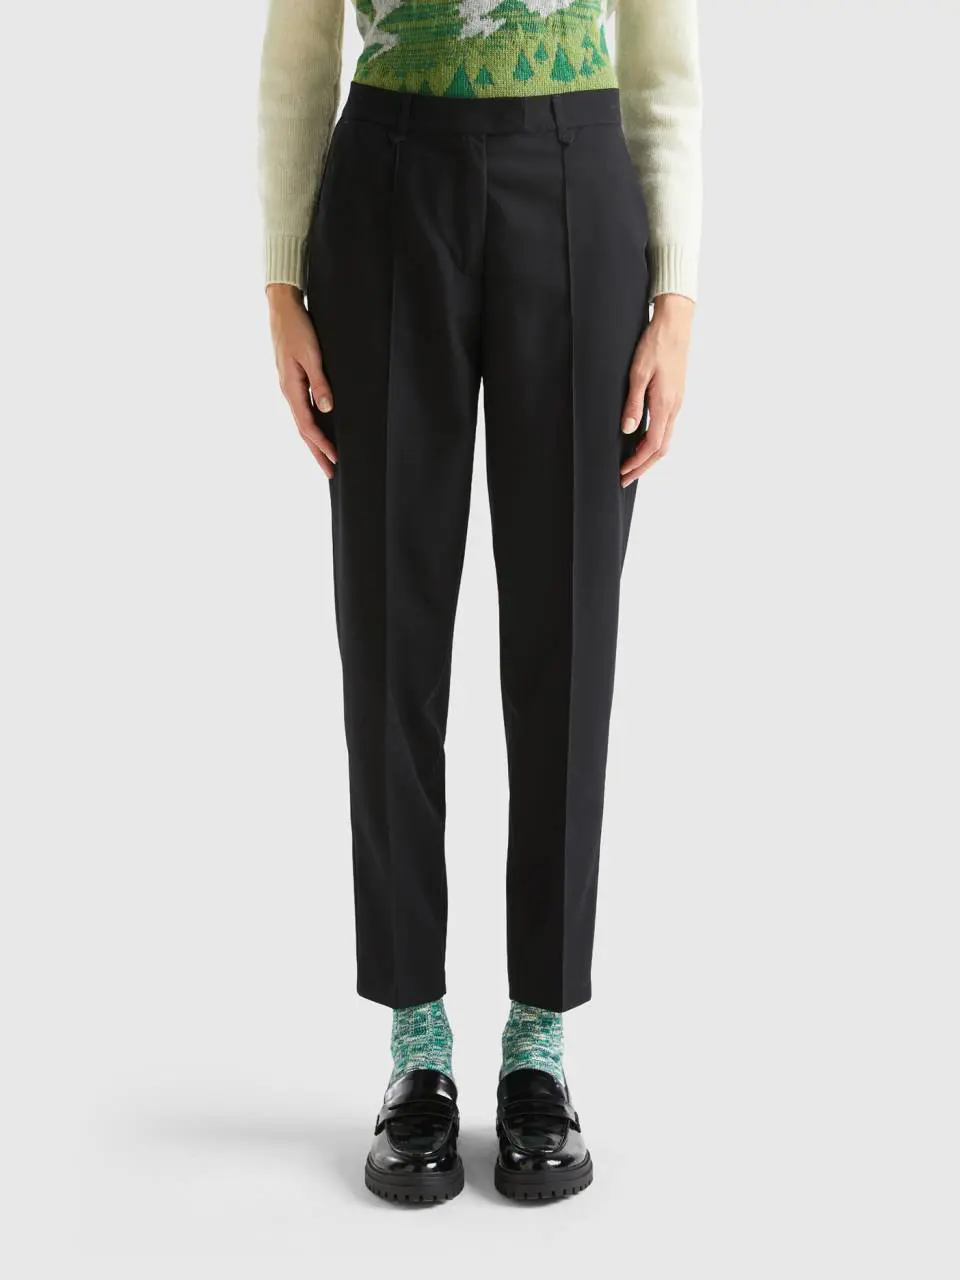 Benetton trousers in viscose blend. 1